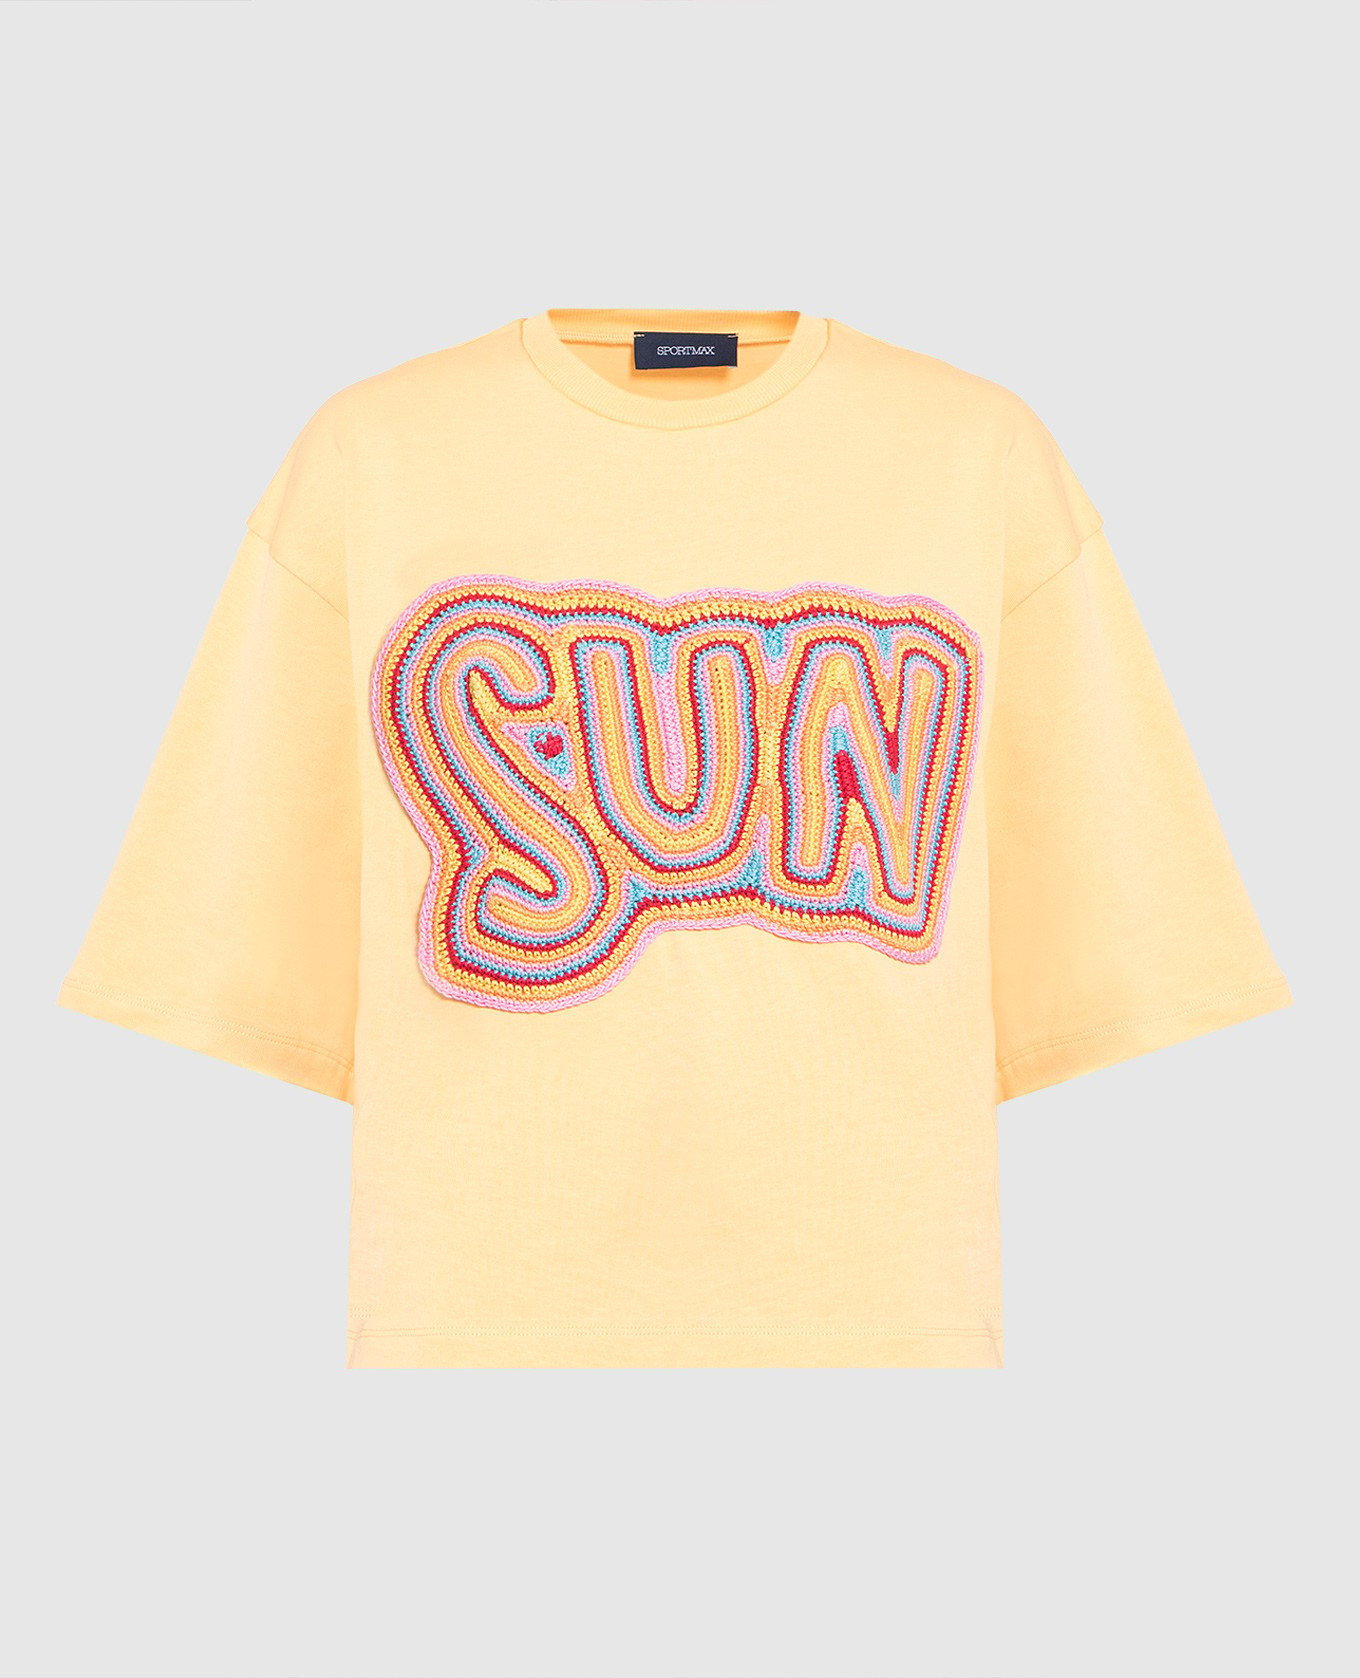 Yellow t-shirt with appliqué